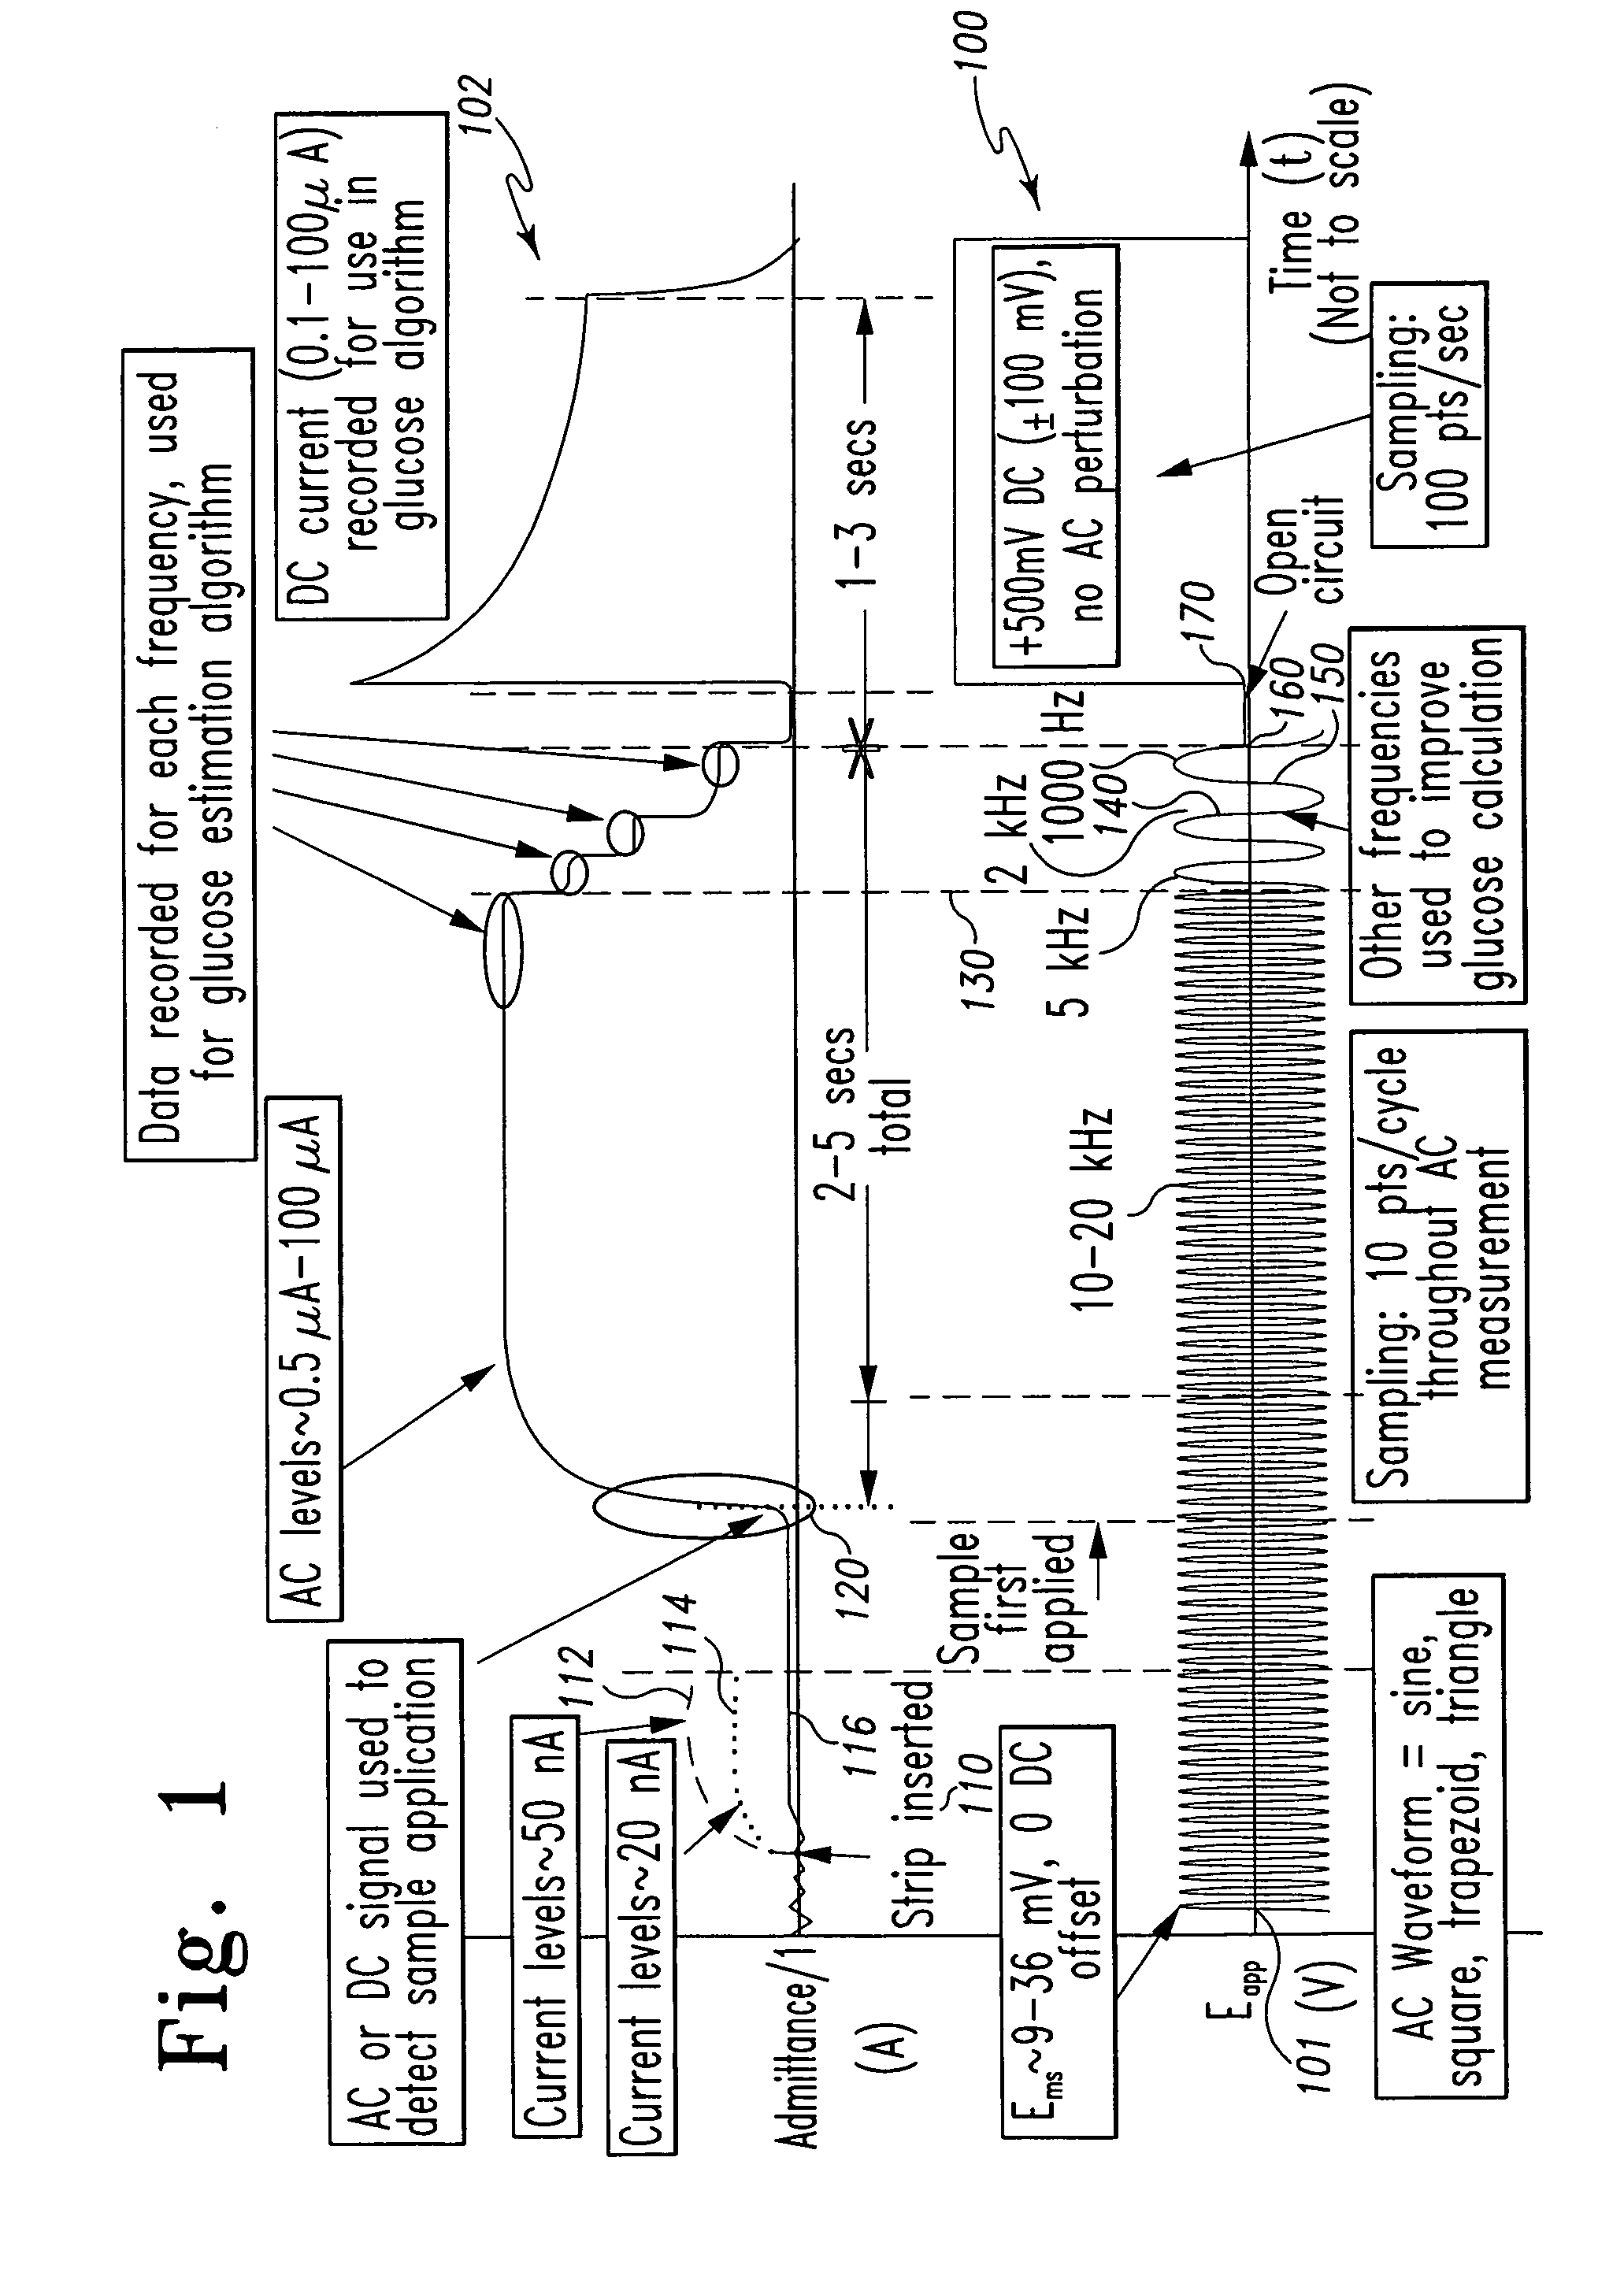 System and method for analyte measurement